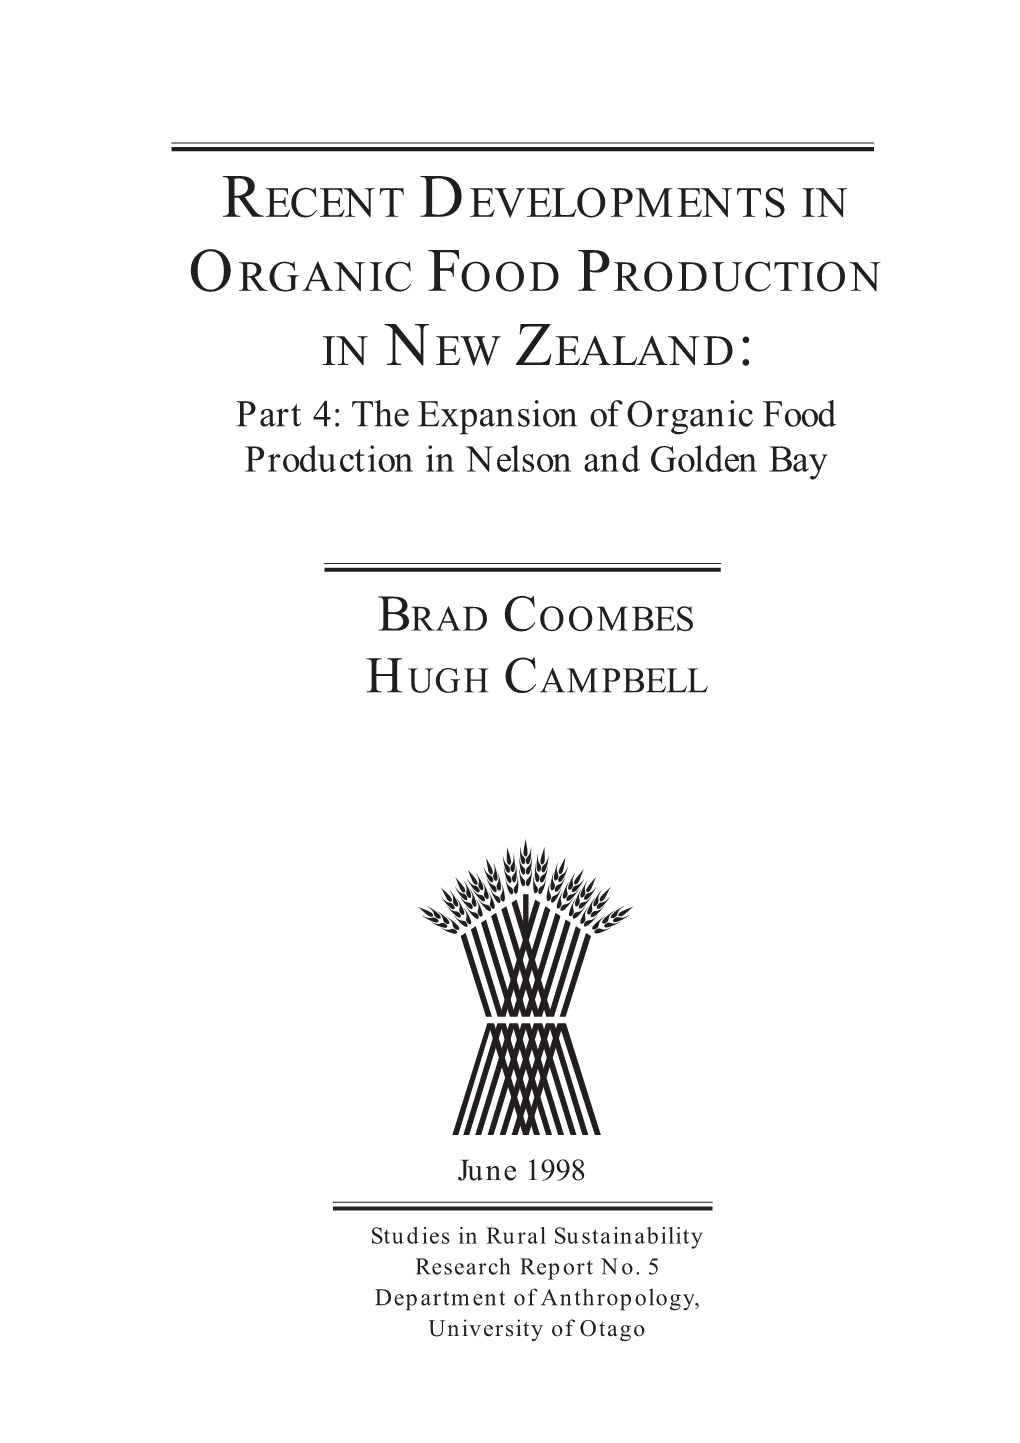 RECENT DEVELOPMENTS in ORGANIC FOOD PRODUCTION in NEW ZEALAND: Part 4: the Expansion of Organic Food Production in Nelson and Golden Bay